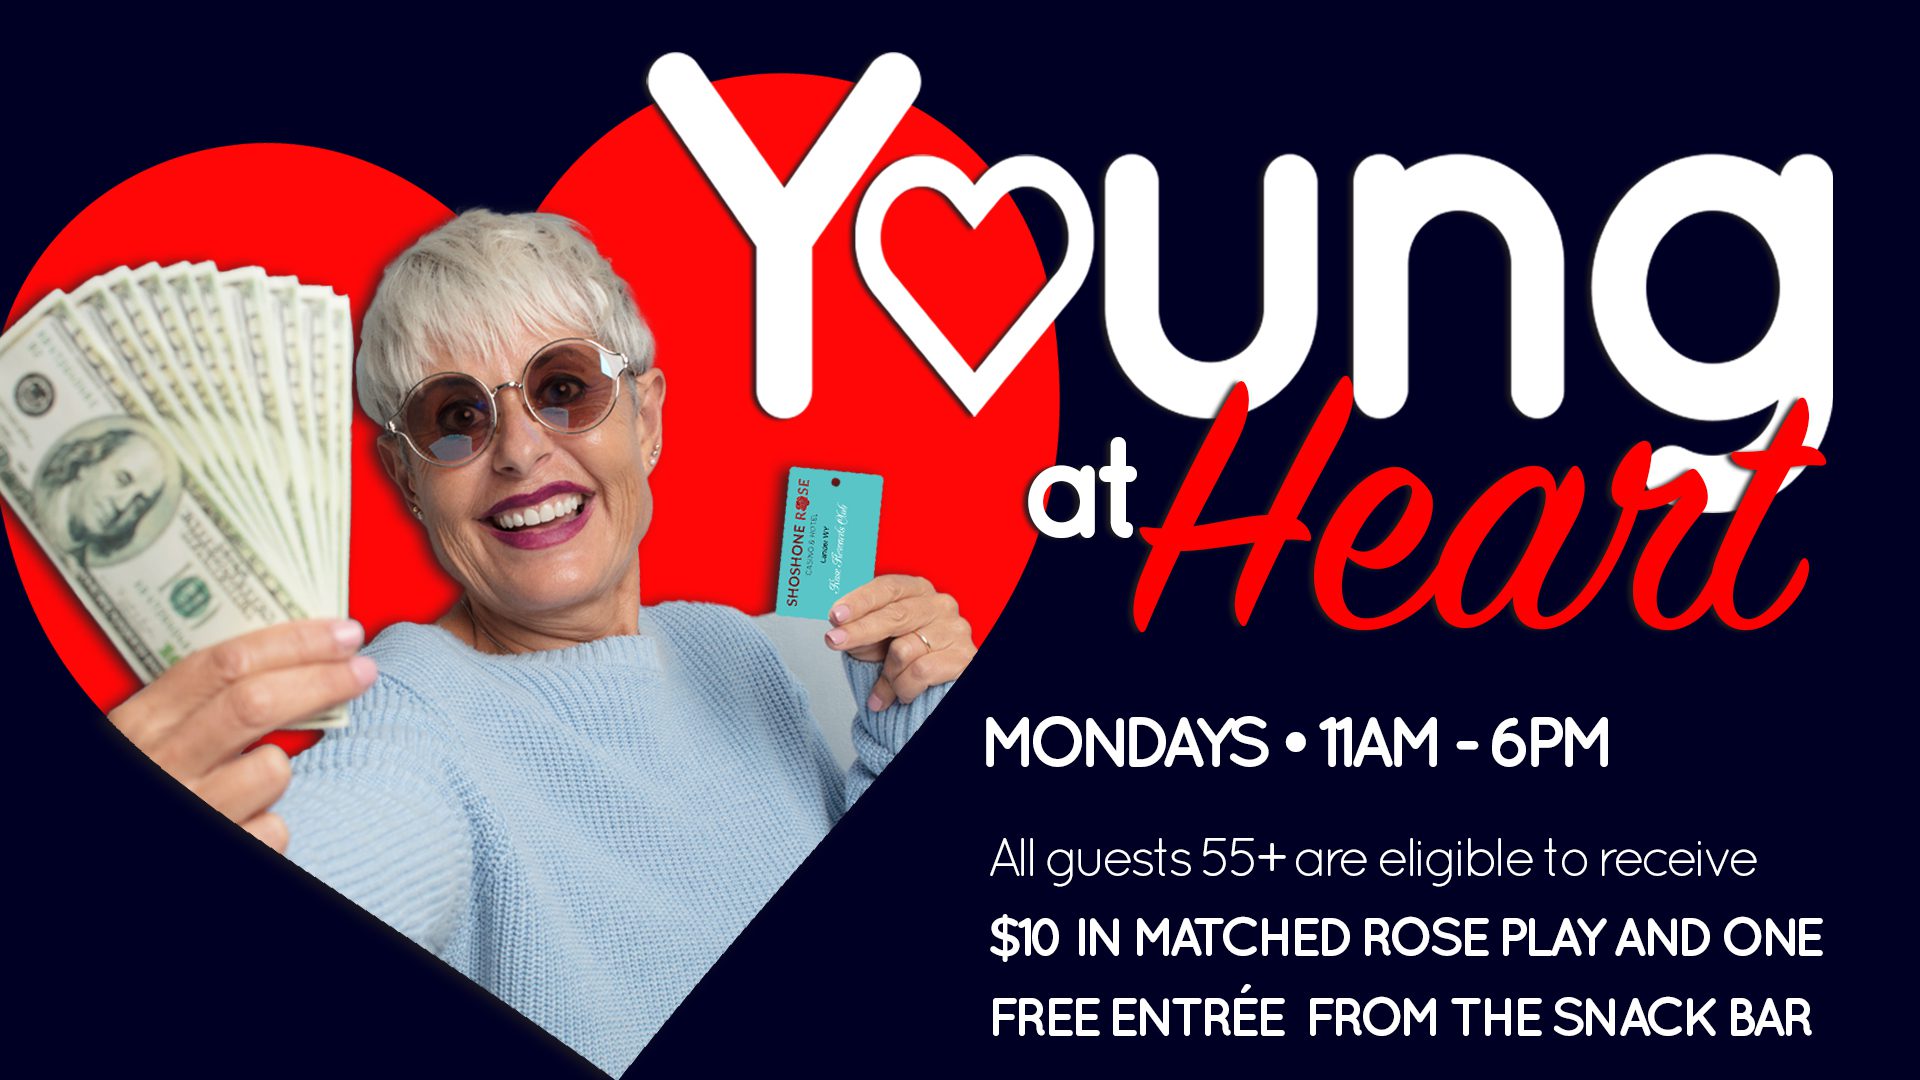 Promotional banner featuring a cheerful senior woman holding money and a card, advertising "young at heart" event with special offers for guests 55+ on mondays.